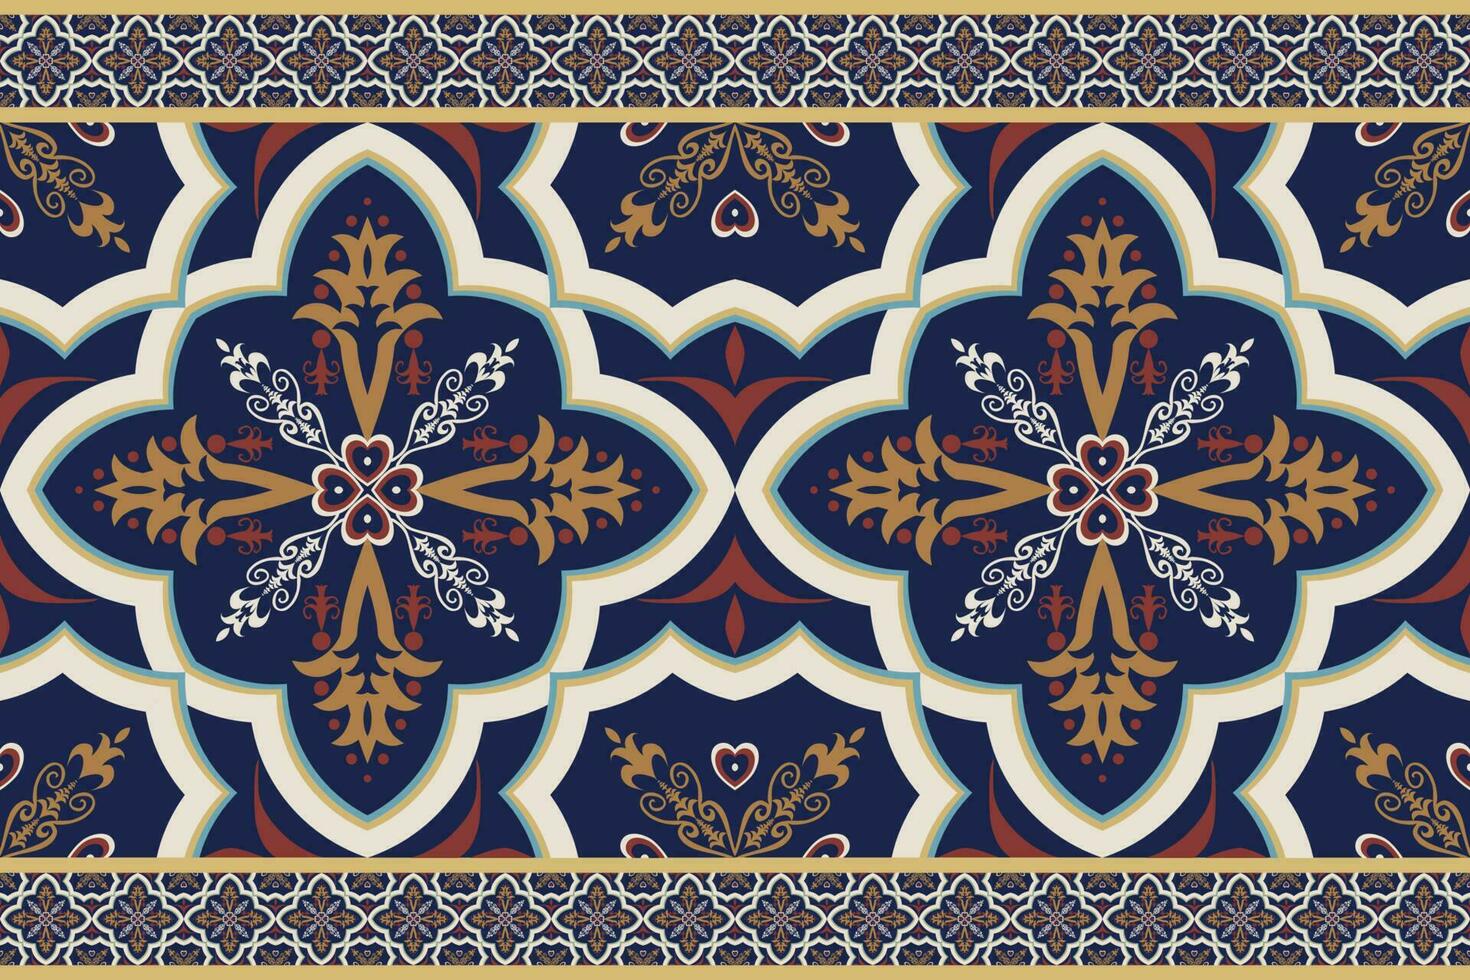 Ethnic border geometric floral pattern. Ethnic geometric floral shape seamless pattern Arabic style. Use for fabric, textile, carpet, rug, architectural ornaments, home decoration elements, etc vector